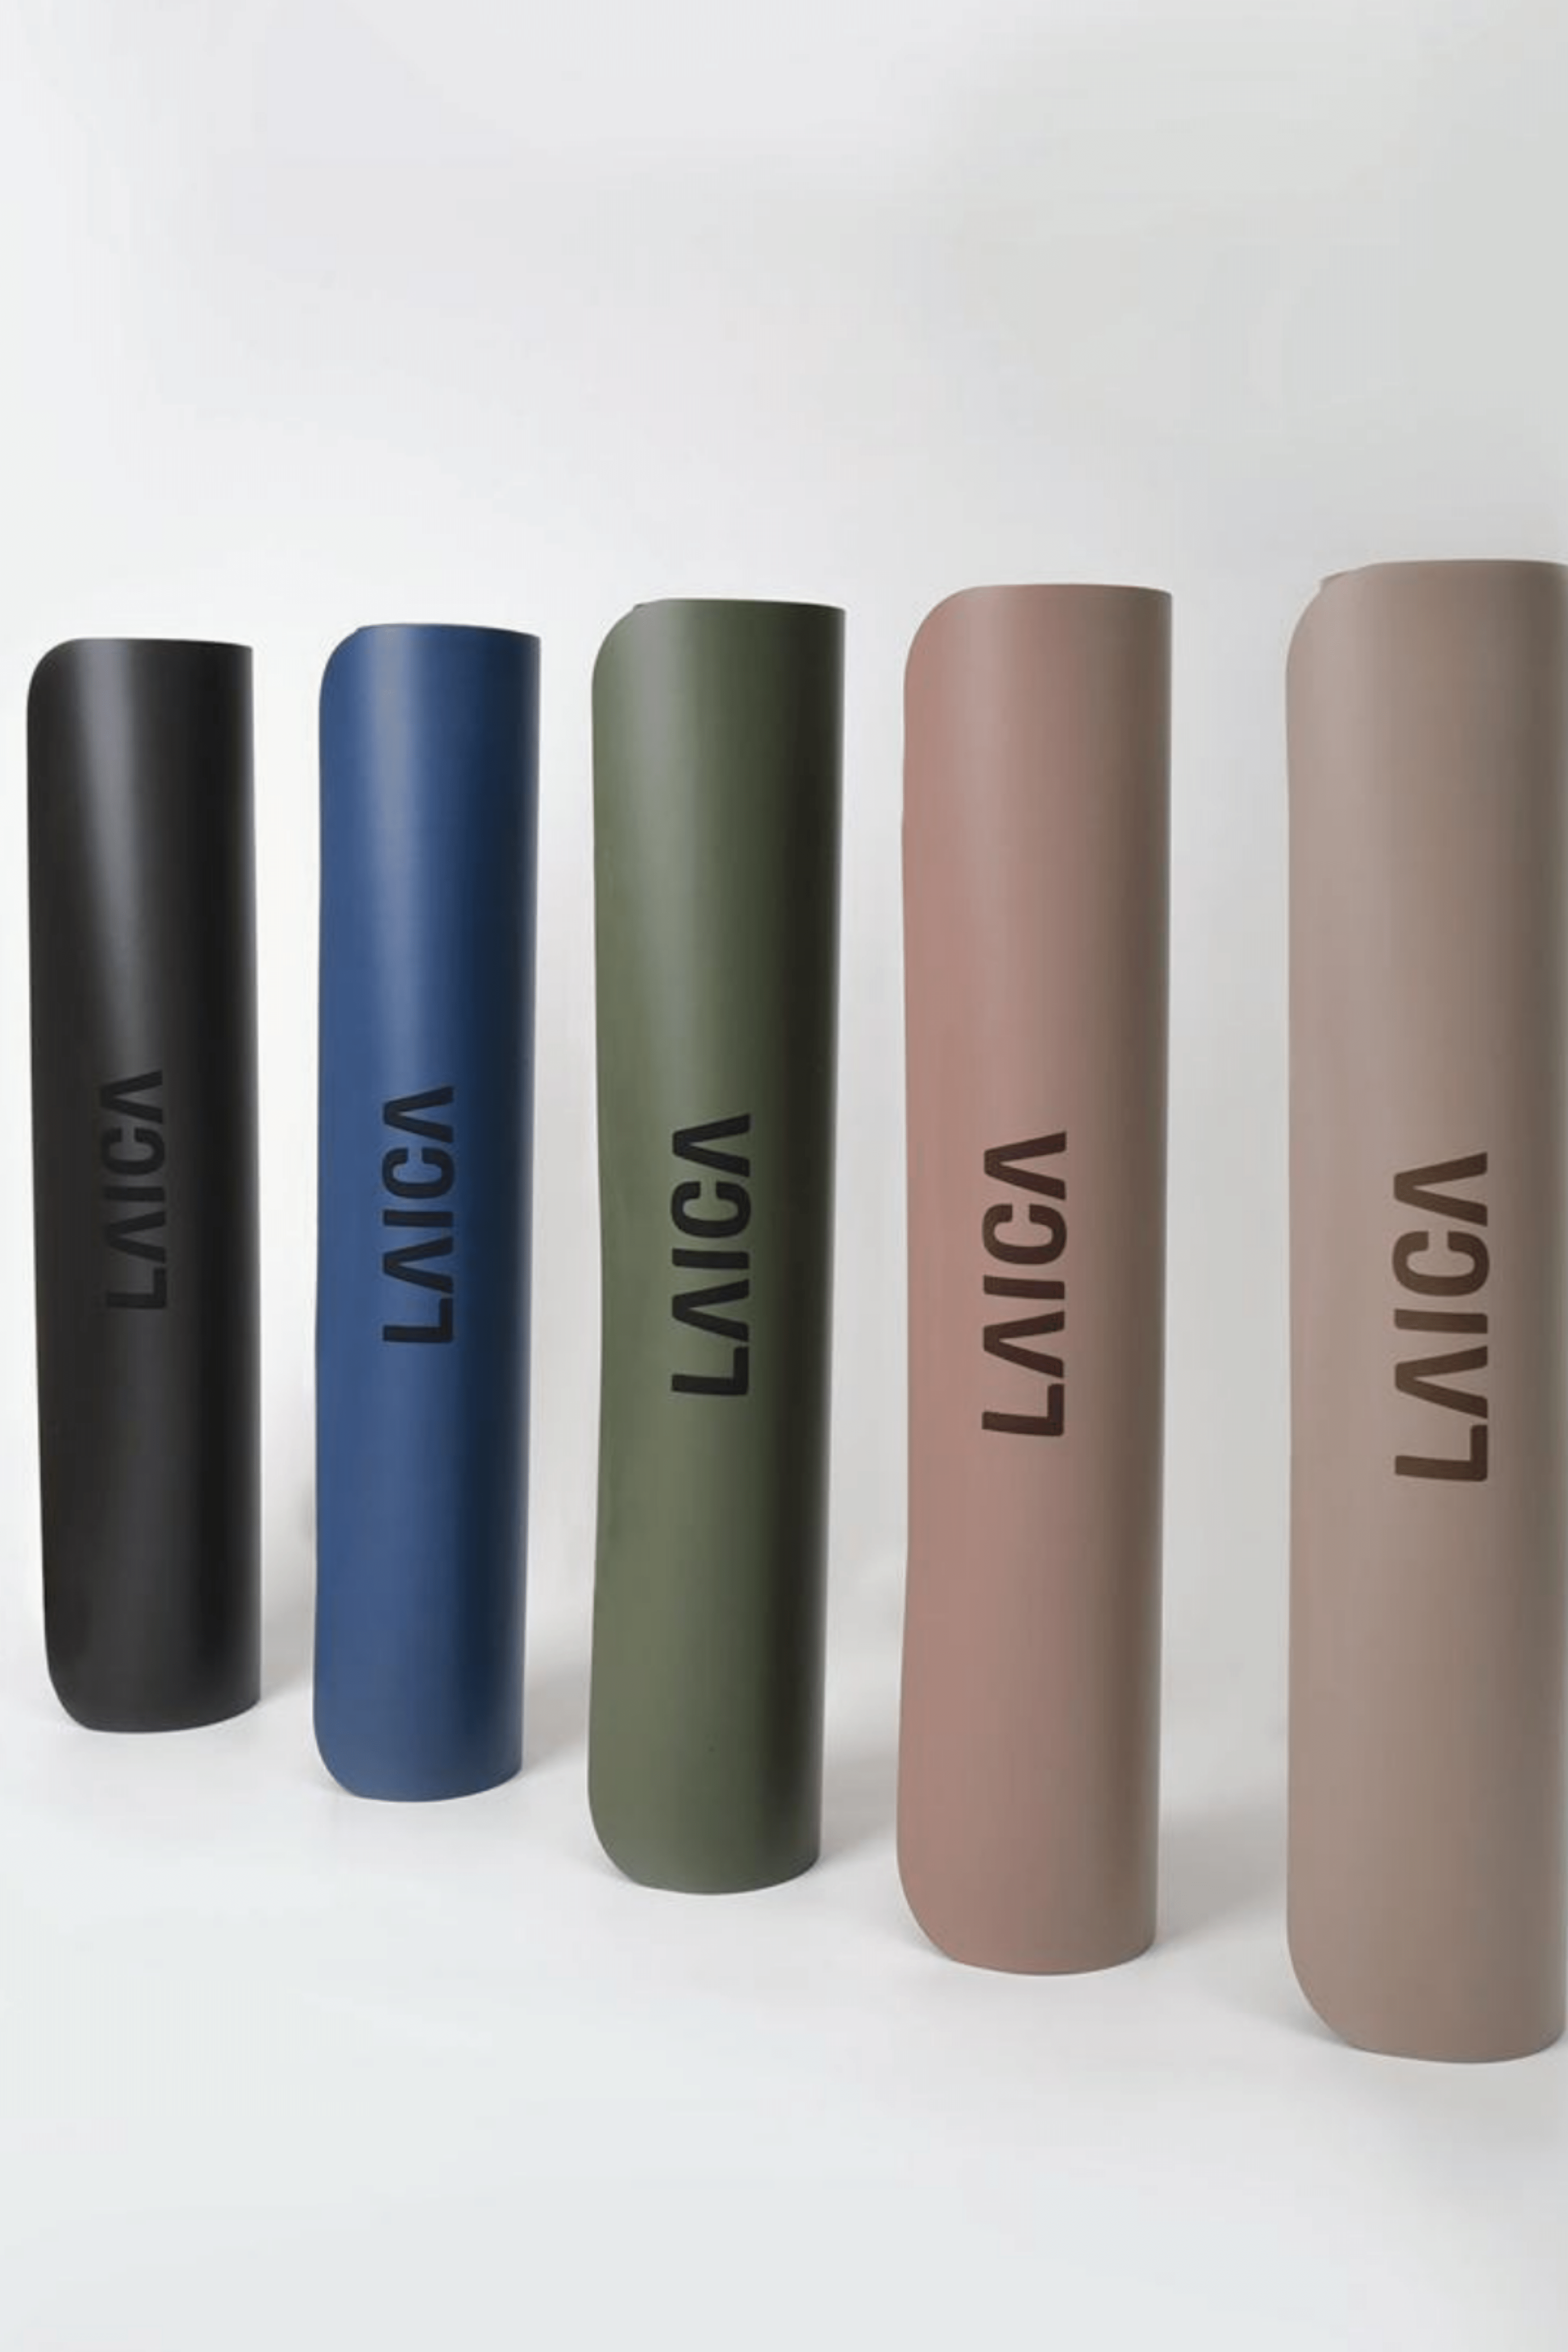 LAICA Luxe Yoga Mat - Sunset Pink